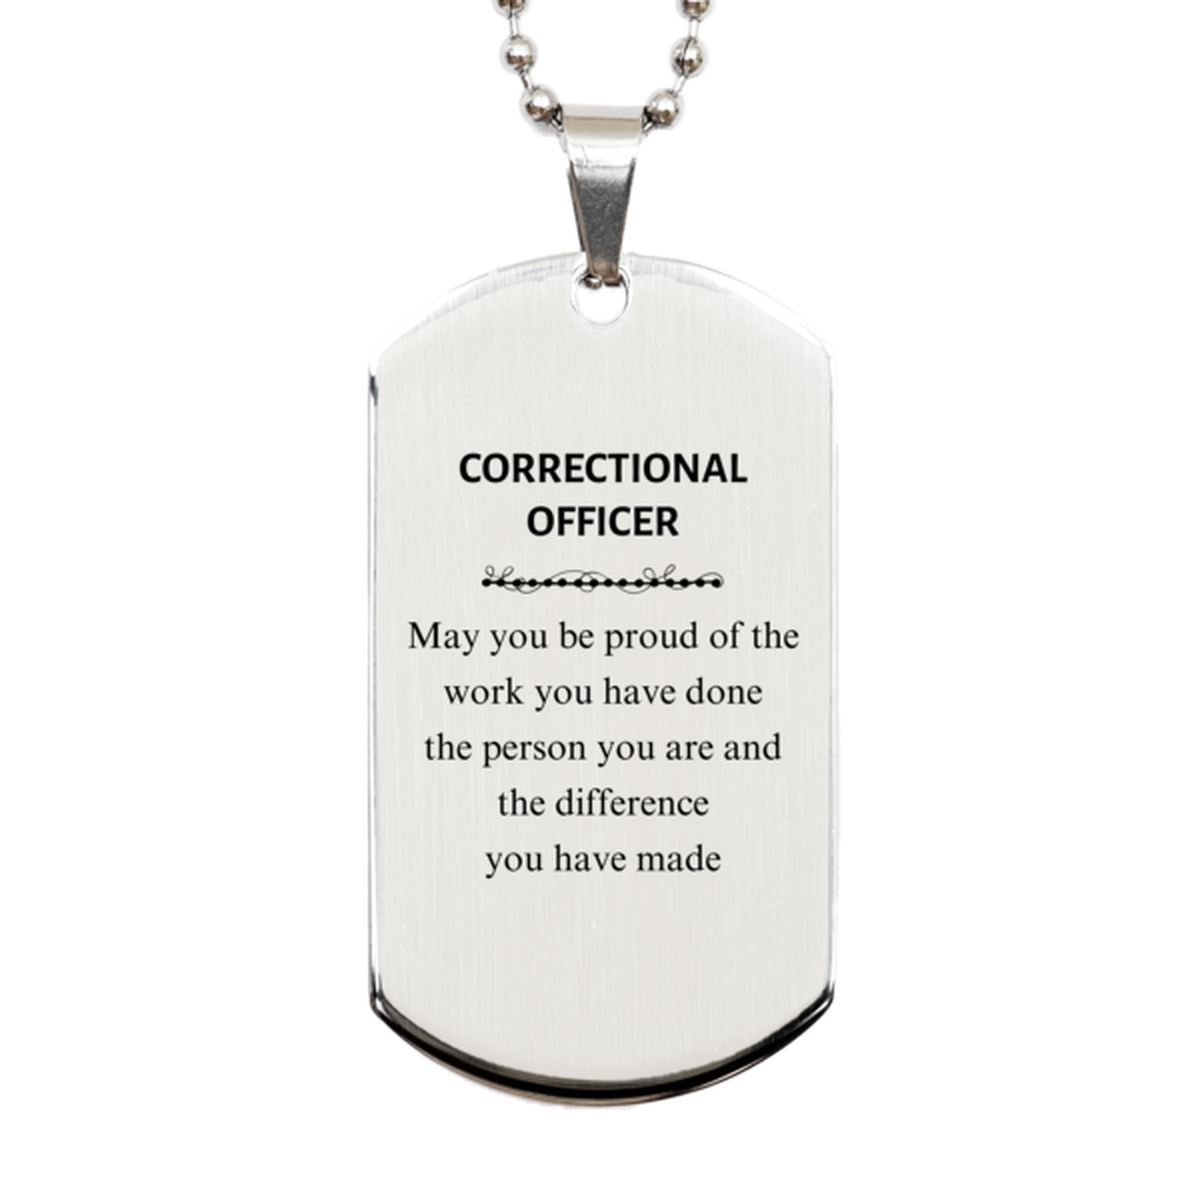 Correctional Officer May you be proud of the work you have done, Retirement Correctional Officer Silver Dog Tag for Colleague Appreciation Gifts Amazing for Correctional Officer